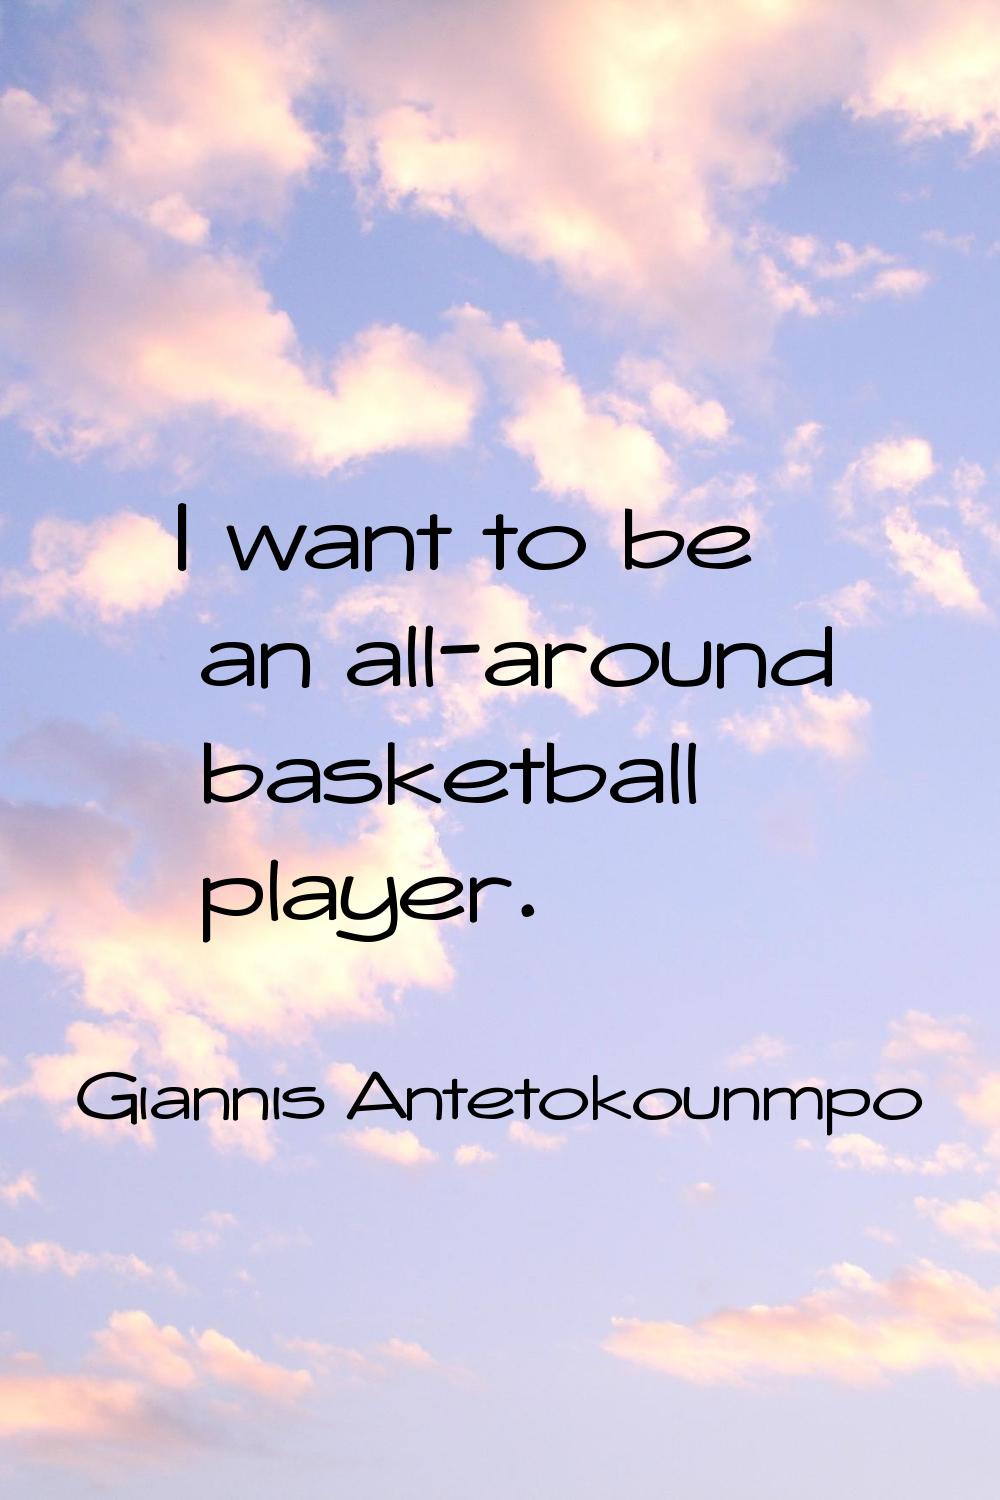 I want to be an all-around basketball player.